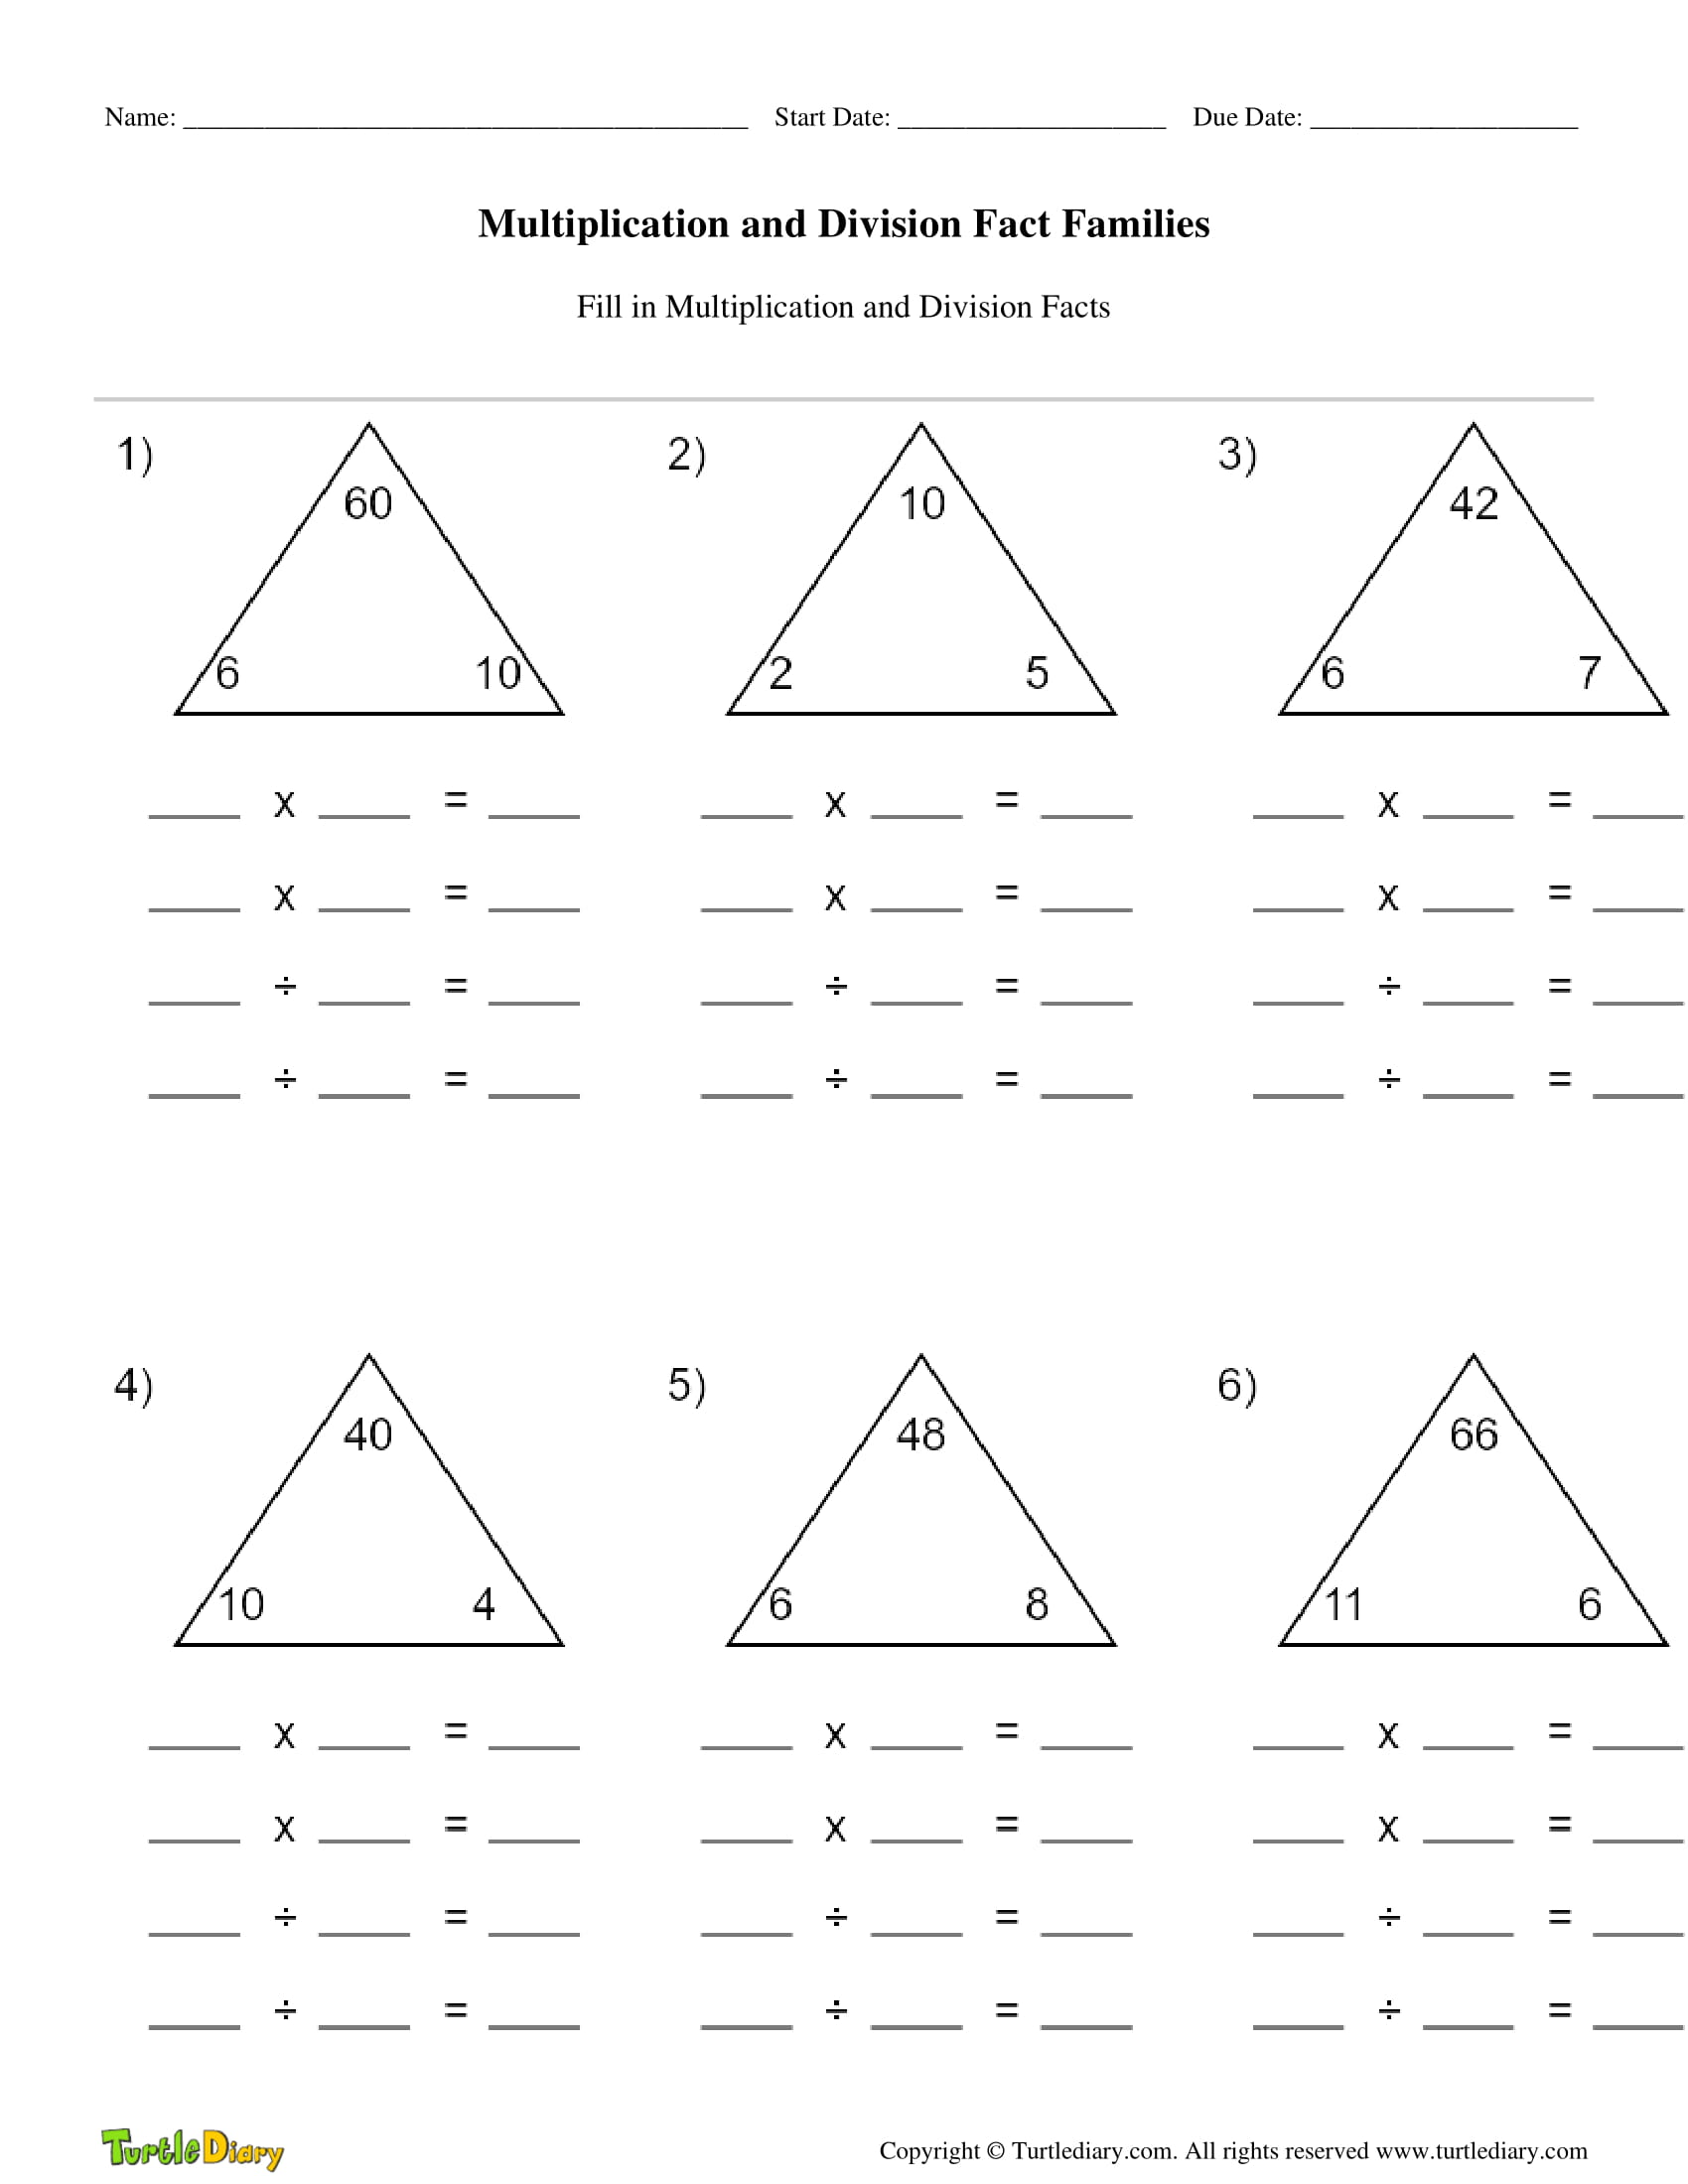 multiplication-and-division-fact-family-triangles